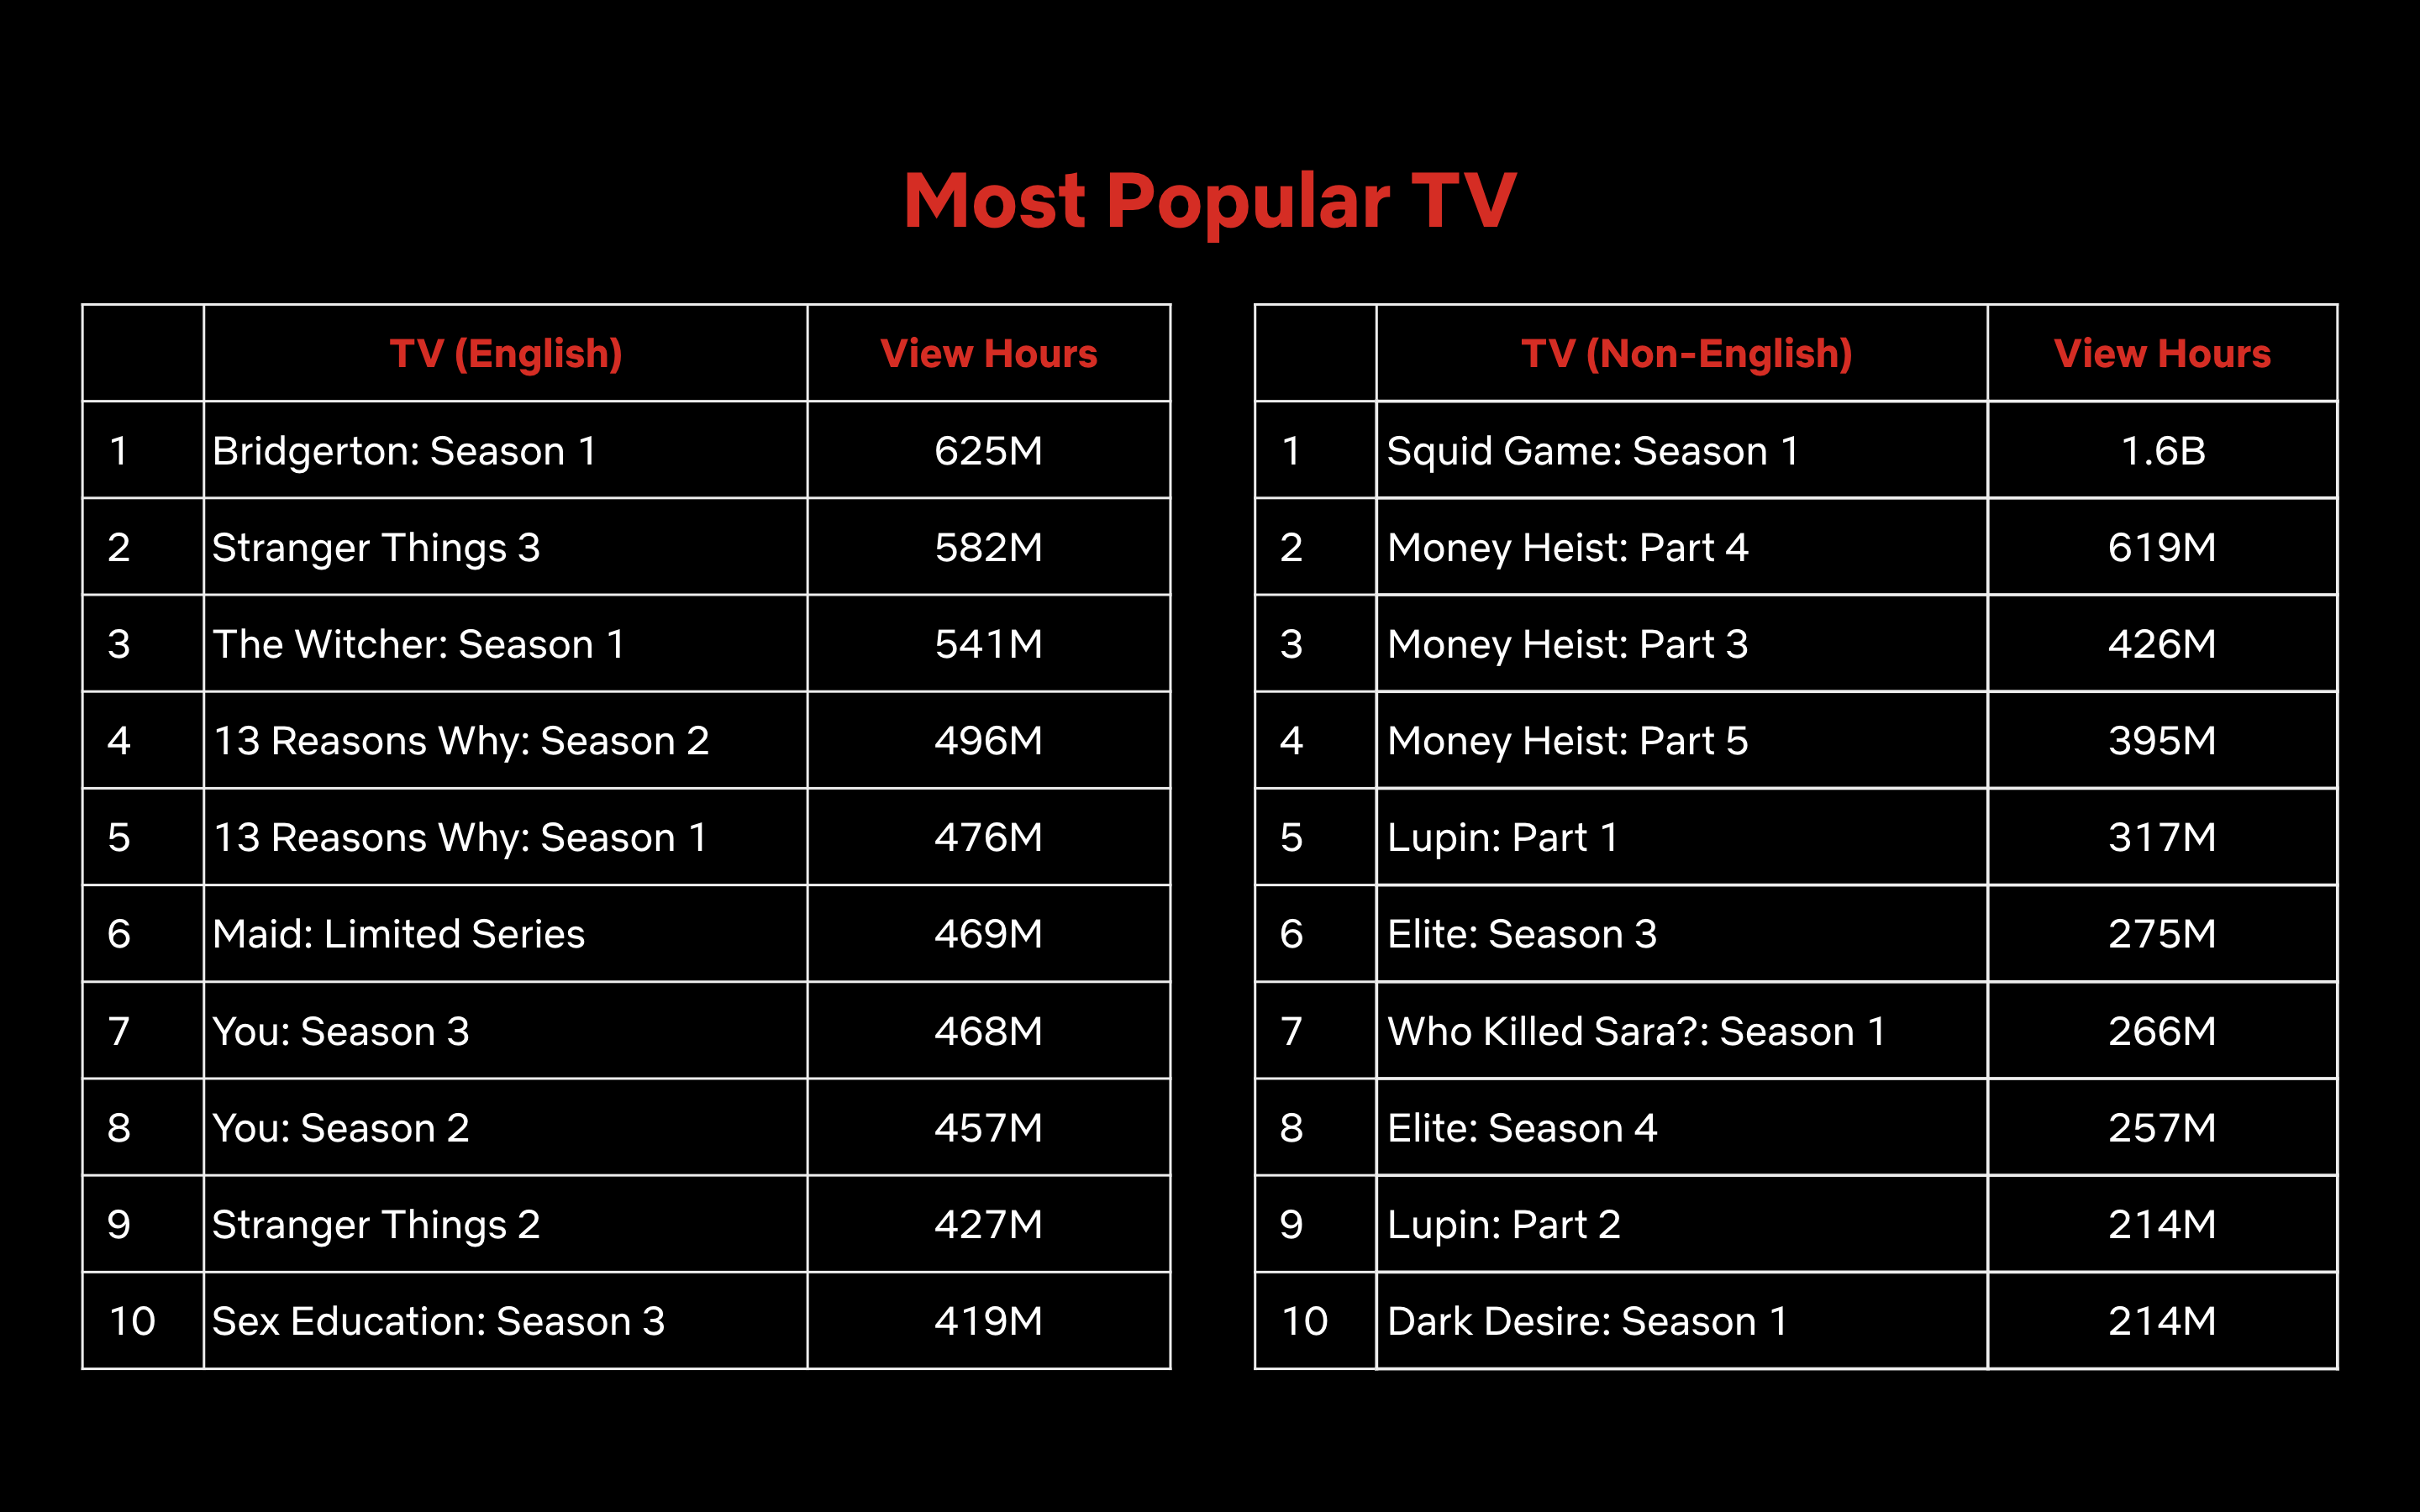 A weekly list of the top 10 most popular television shows on Netflix from November 7 through November 15, 2021